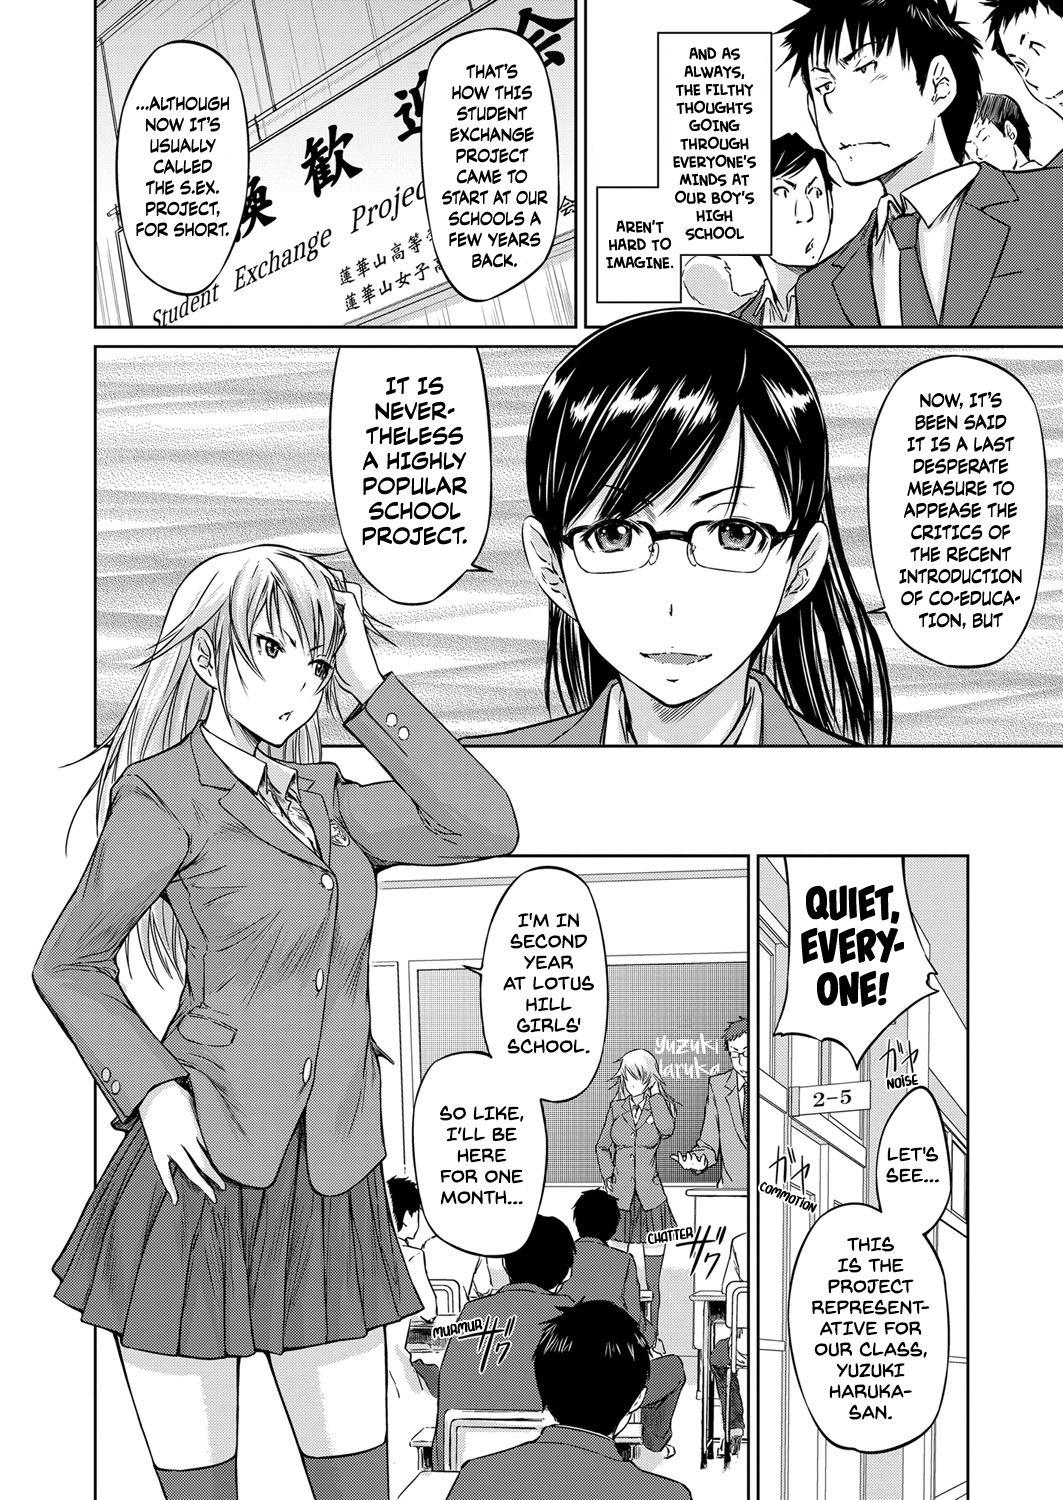 Orgy Seitou Koukan no Susume | Student Exchange Recommendation Hardfuck - Page 2